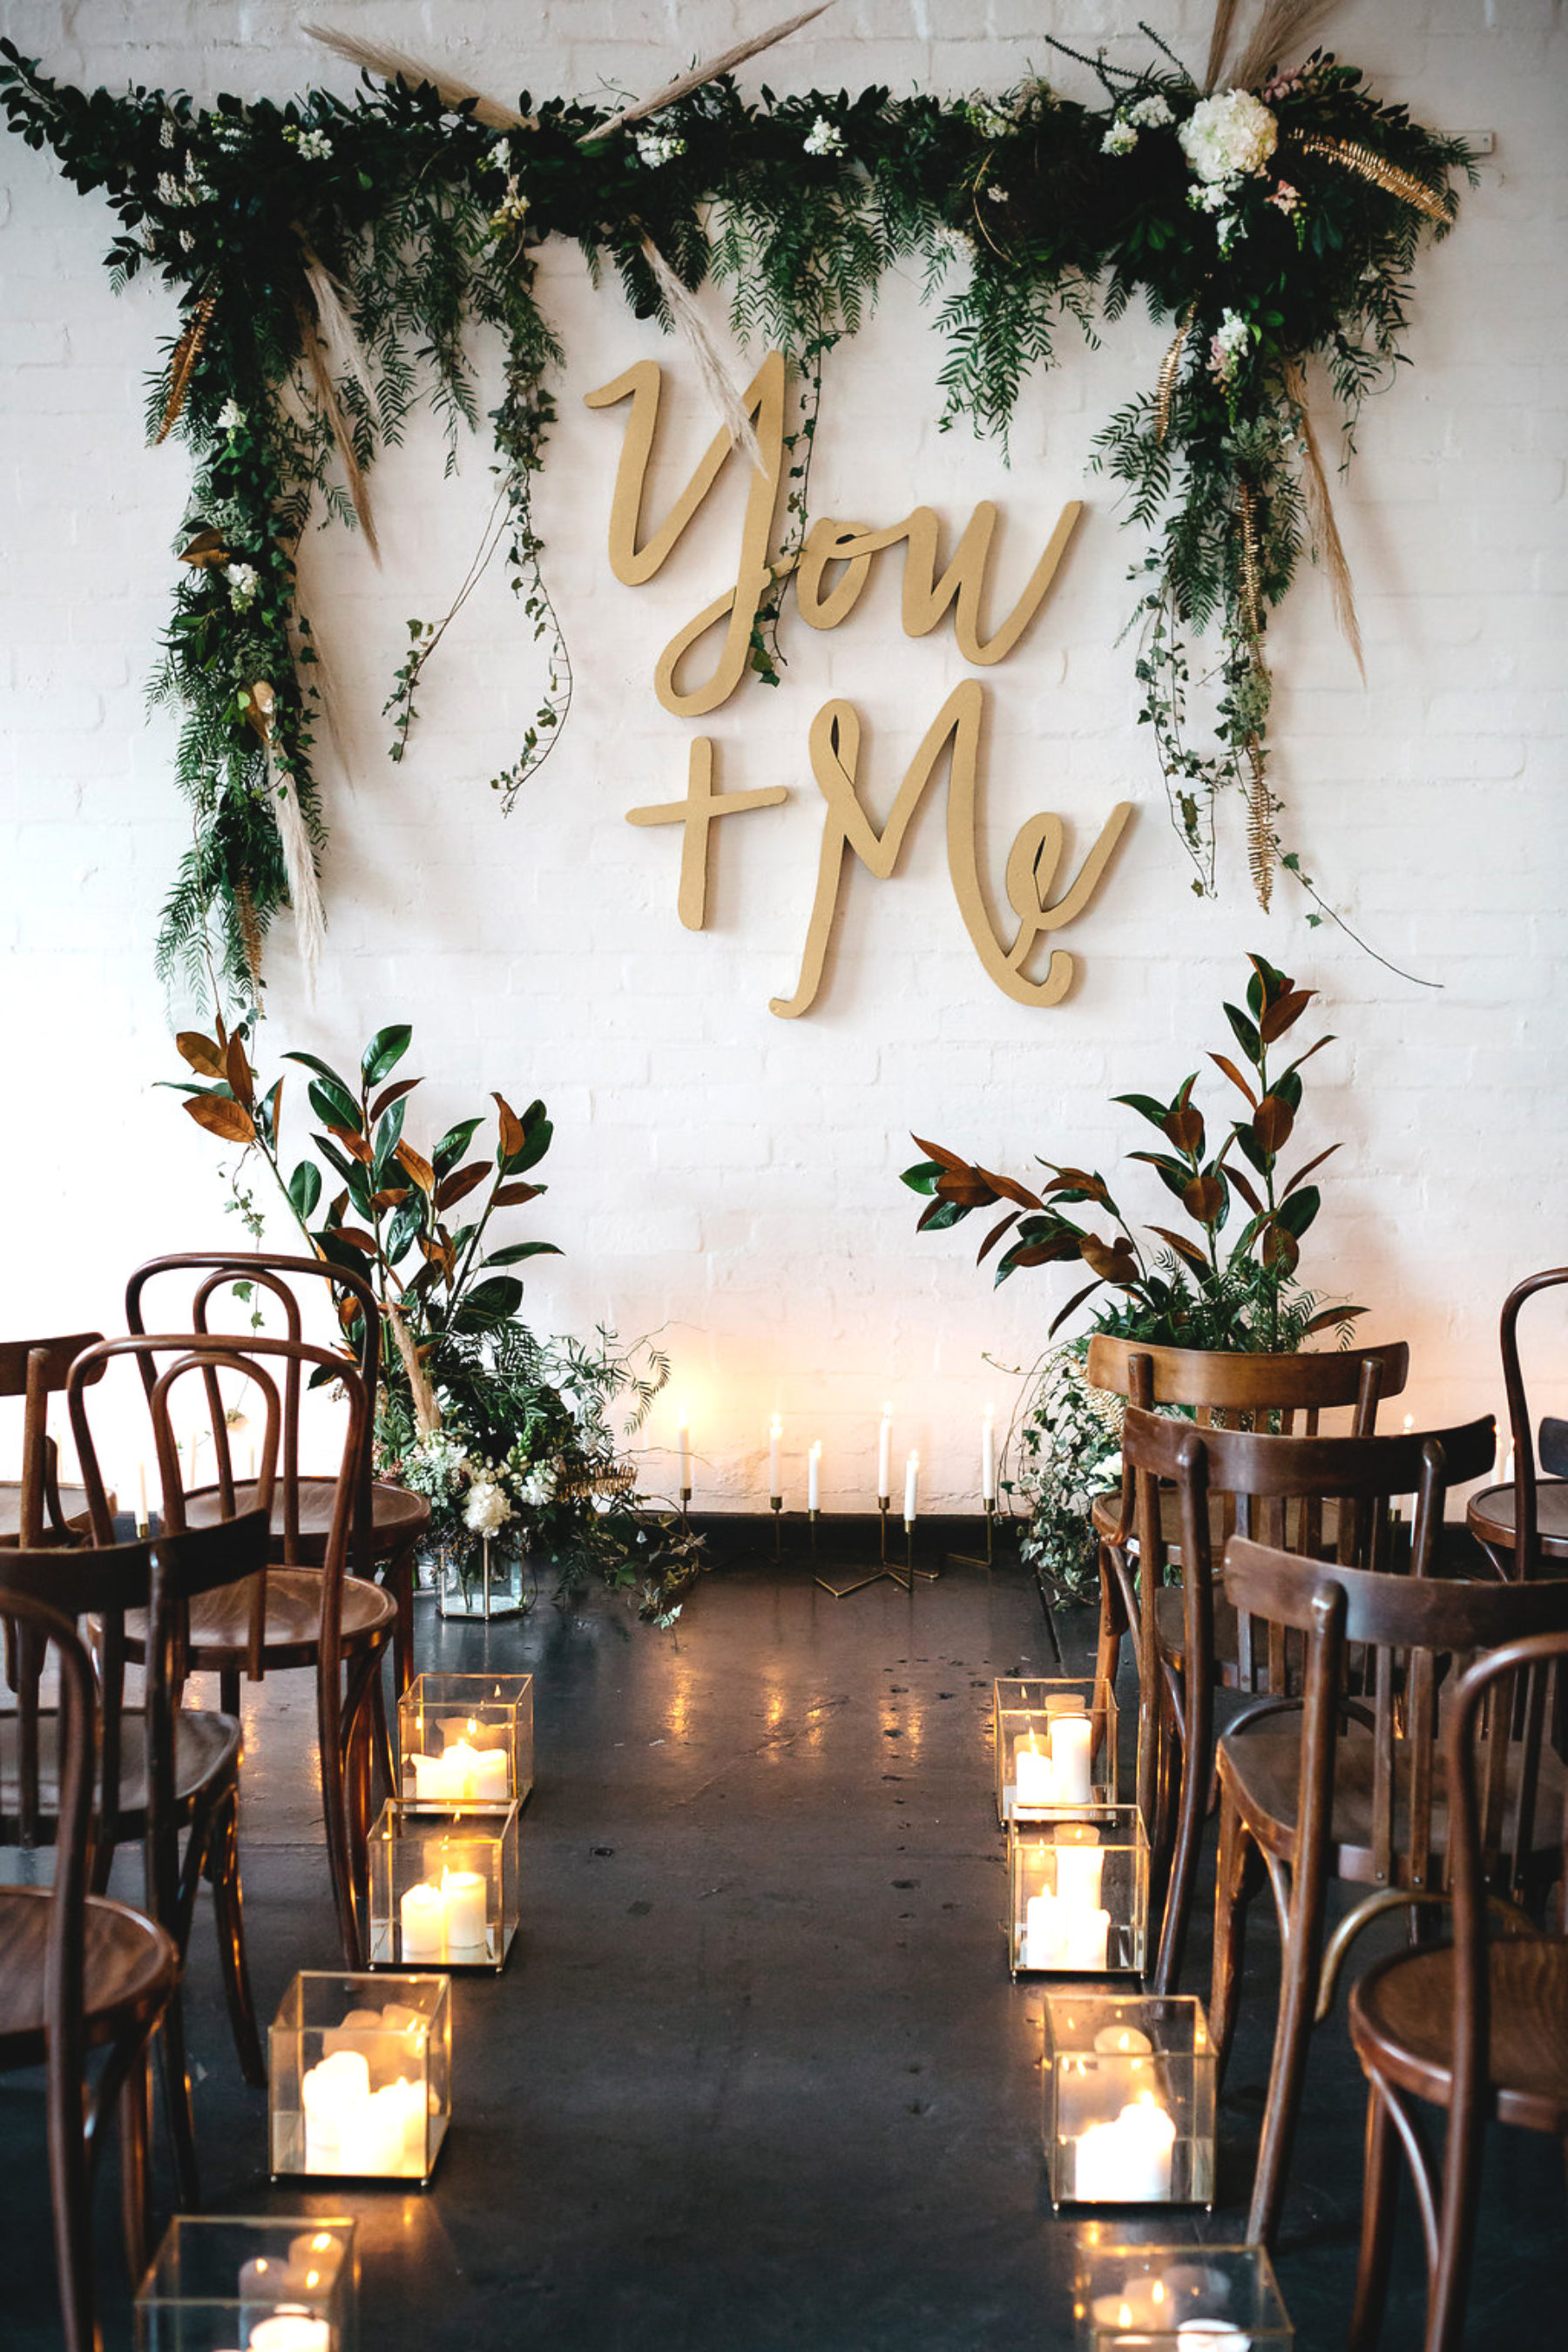 Industrial Indoor Wedding Ceremony Using Geometric Candle Holder to Decorate the Aisle. // 15 Stunning Ways to Decorate with Candles // http://mysweetengagement.com